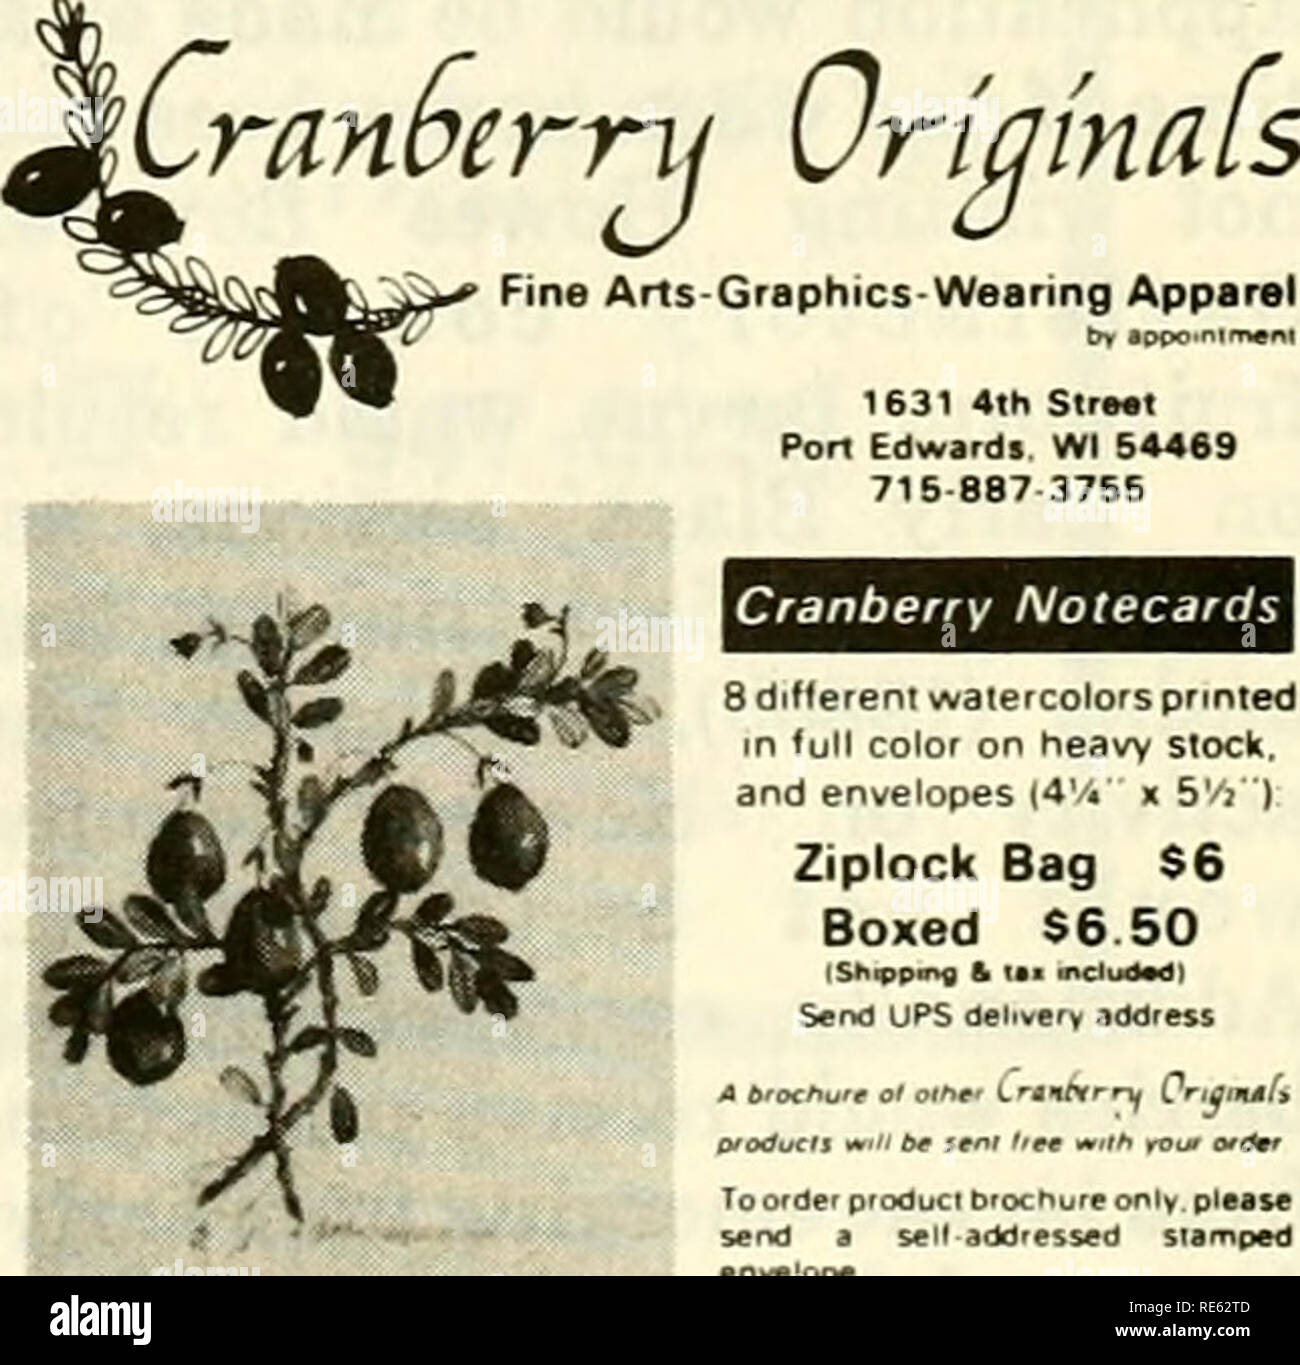 . Cranberries; : the national cranberry magazine. Cranberries. Table 1. Efficacy of Spur 22EW in reducing losses to cranberry fruitworm larvae during early berry set on State Bog, East Wareham, Mass. 1985. % berries Treatment &amp; amount (fl oz/acre) with entry hole % entered berries with feces Spur 22EW Untreated 9.0 1.7a 4.0b 41.8a 83.4b Each number represents the average of four plot values. Plot values were derived from total berry counts of 595 to 1,527. Averages followed by the same letter are not significantly different according to the t-test for paired comparisons at Pâ 0.05. |3r lar Stock Photo